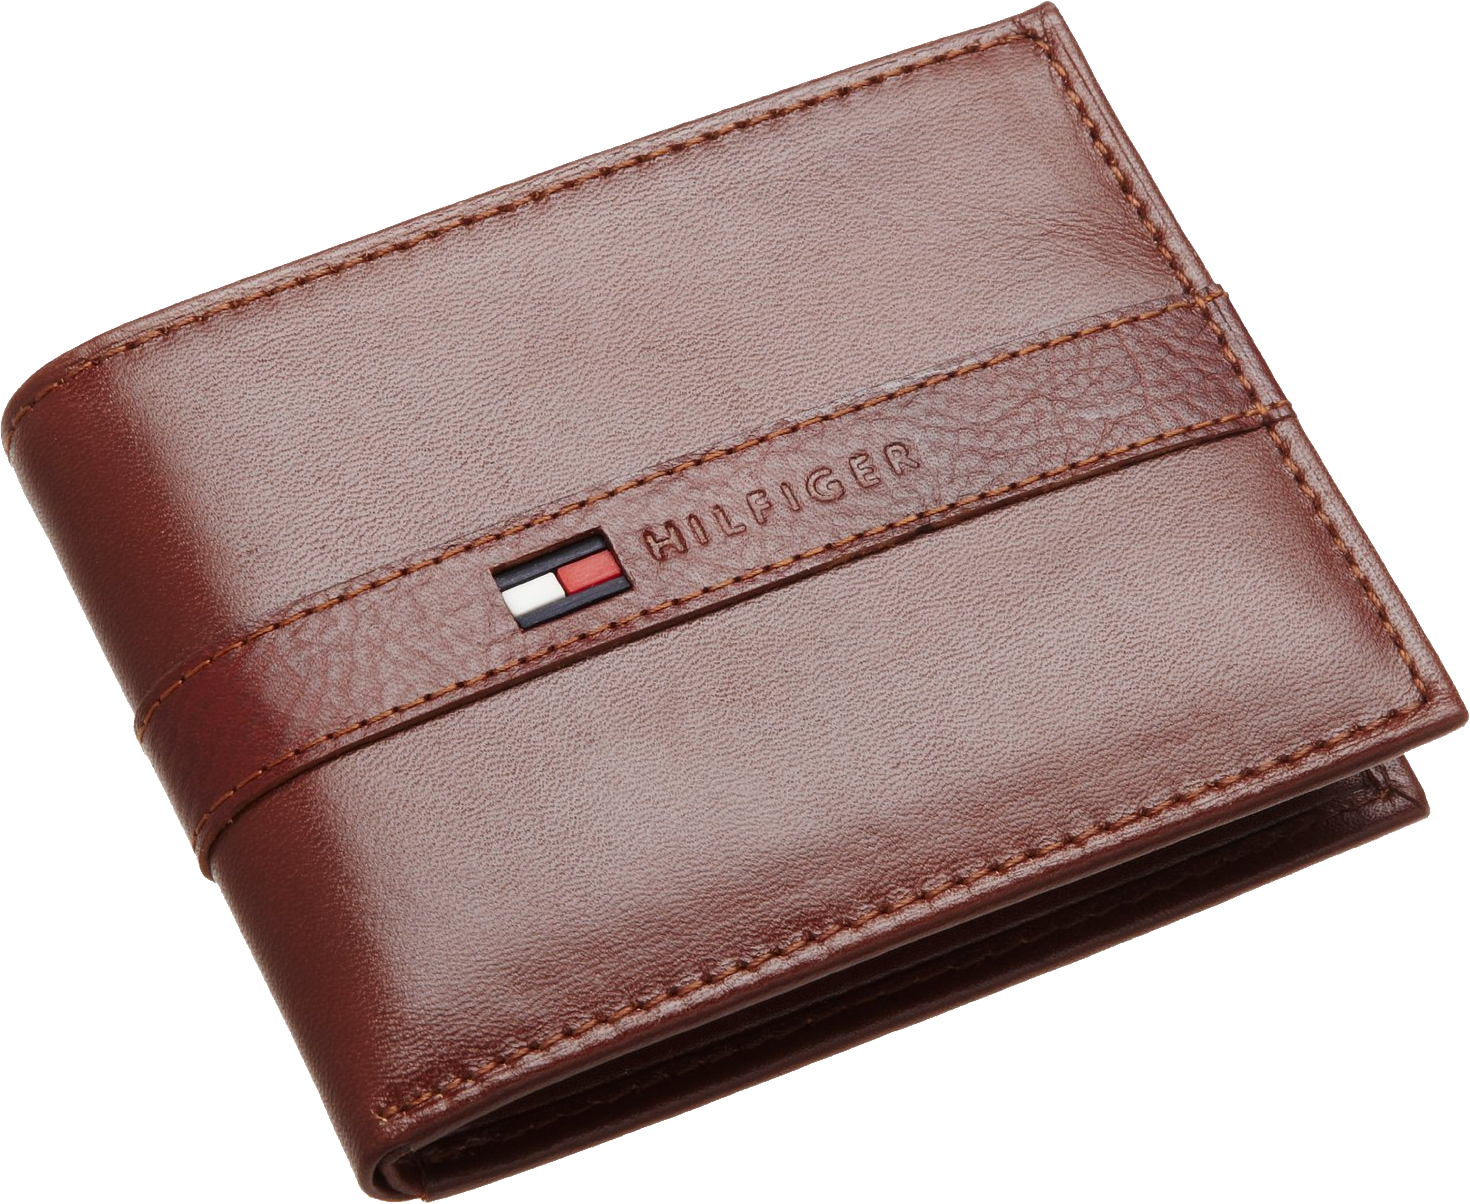 Brown leather wallet PNG image, Wallet PNG - Free PNG